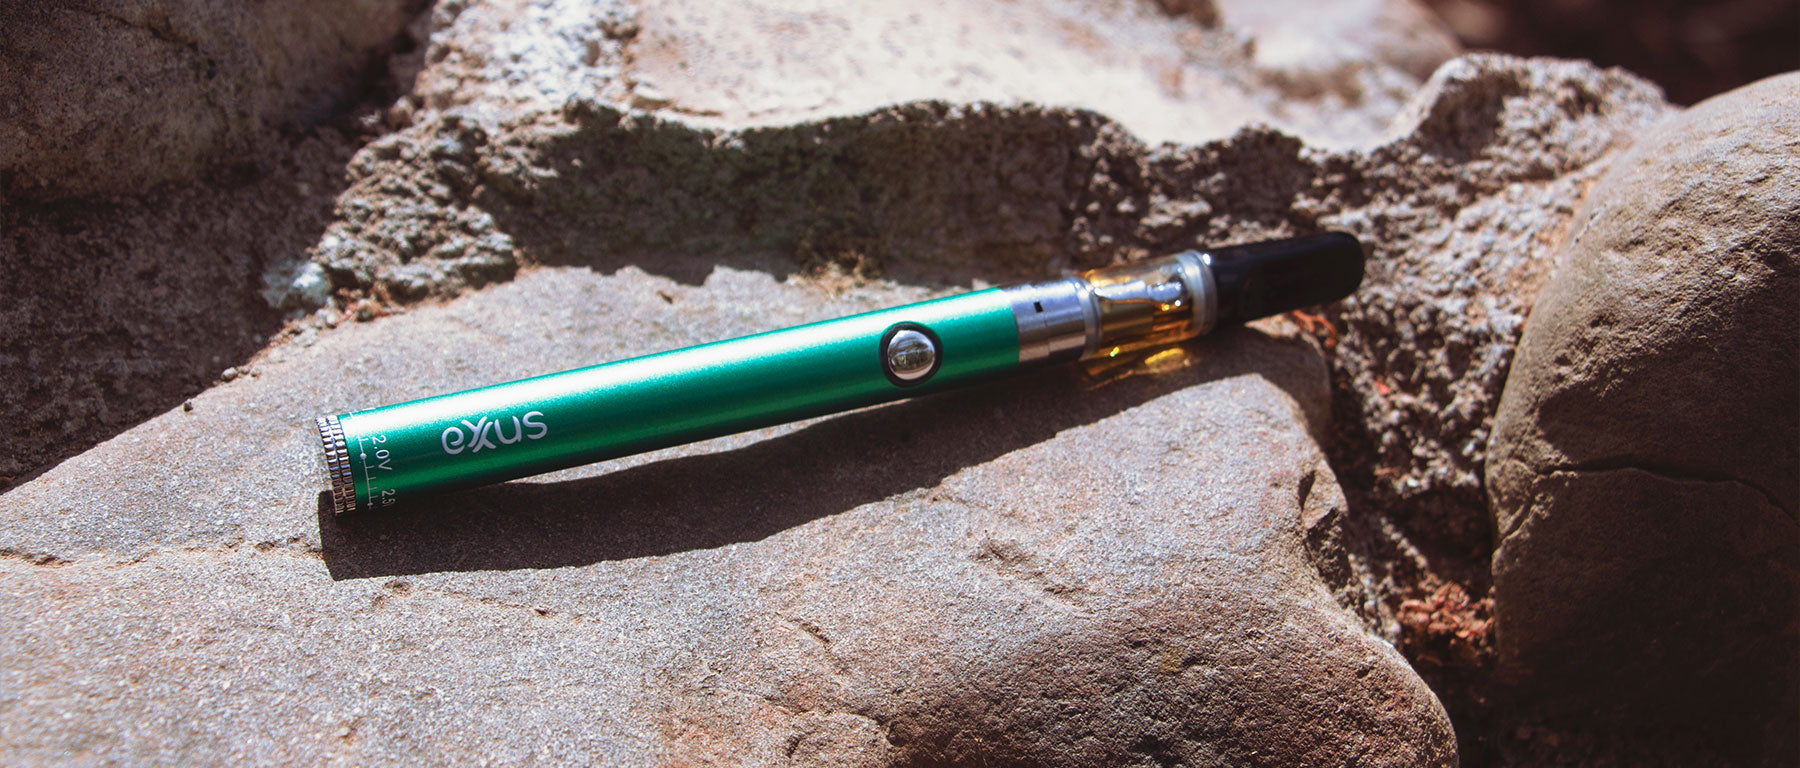 Exxus Twistr Battery with oil cartridge laying on rock outside on a sunny day